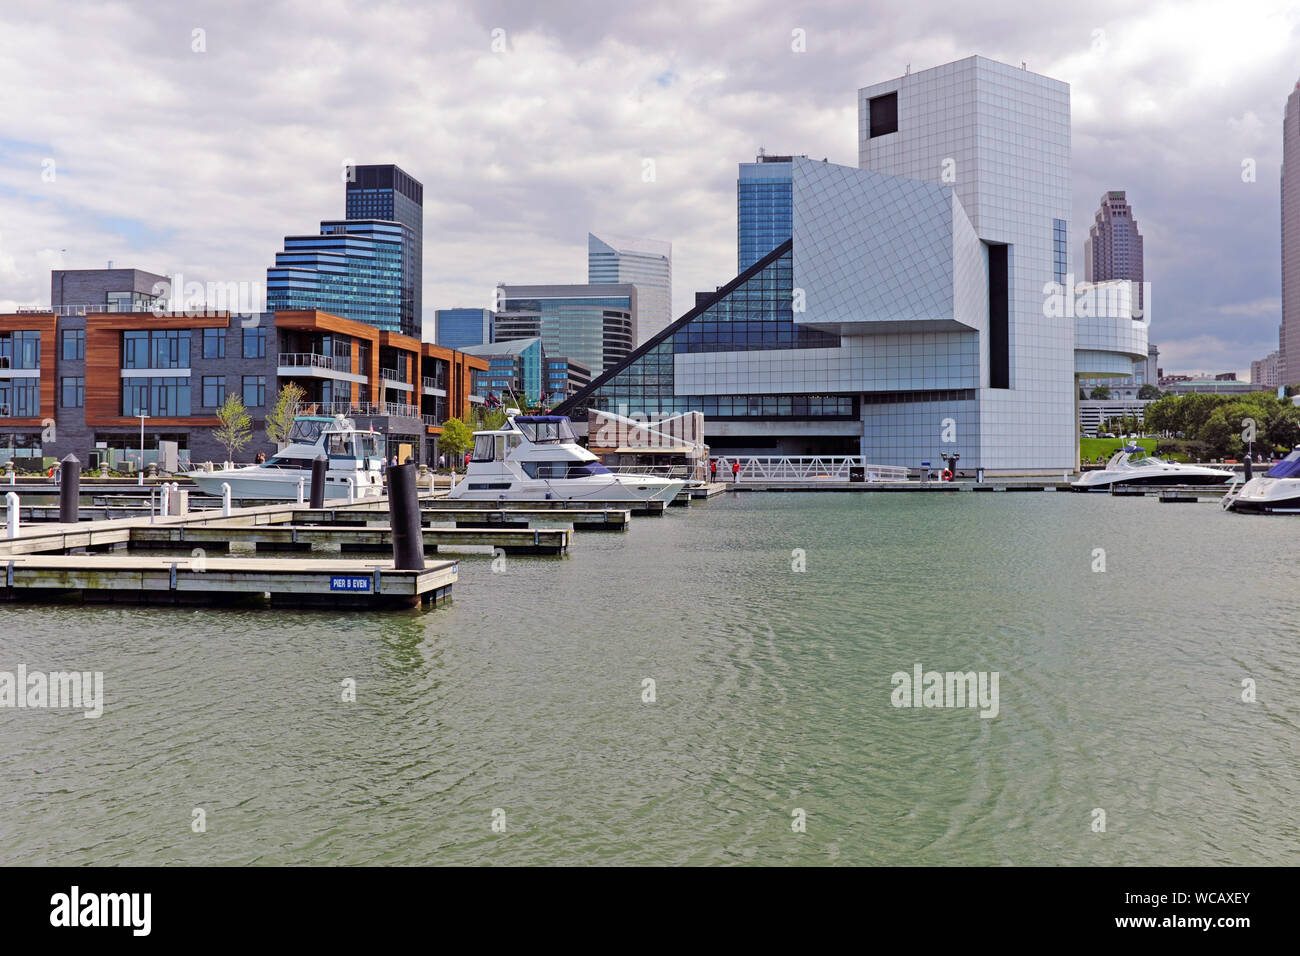 An overcast summer day in the Northcoast Harbor of downtown Cleveland, Ohio, USA. Stock Photo